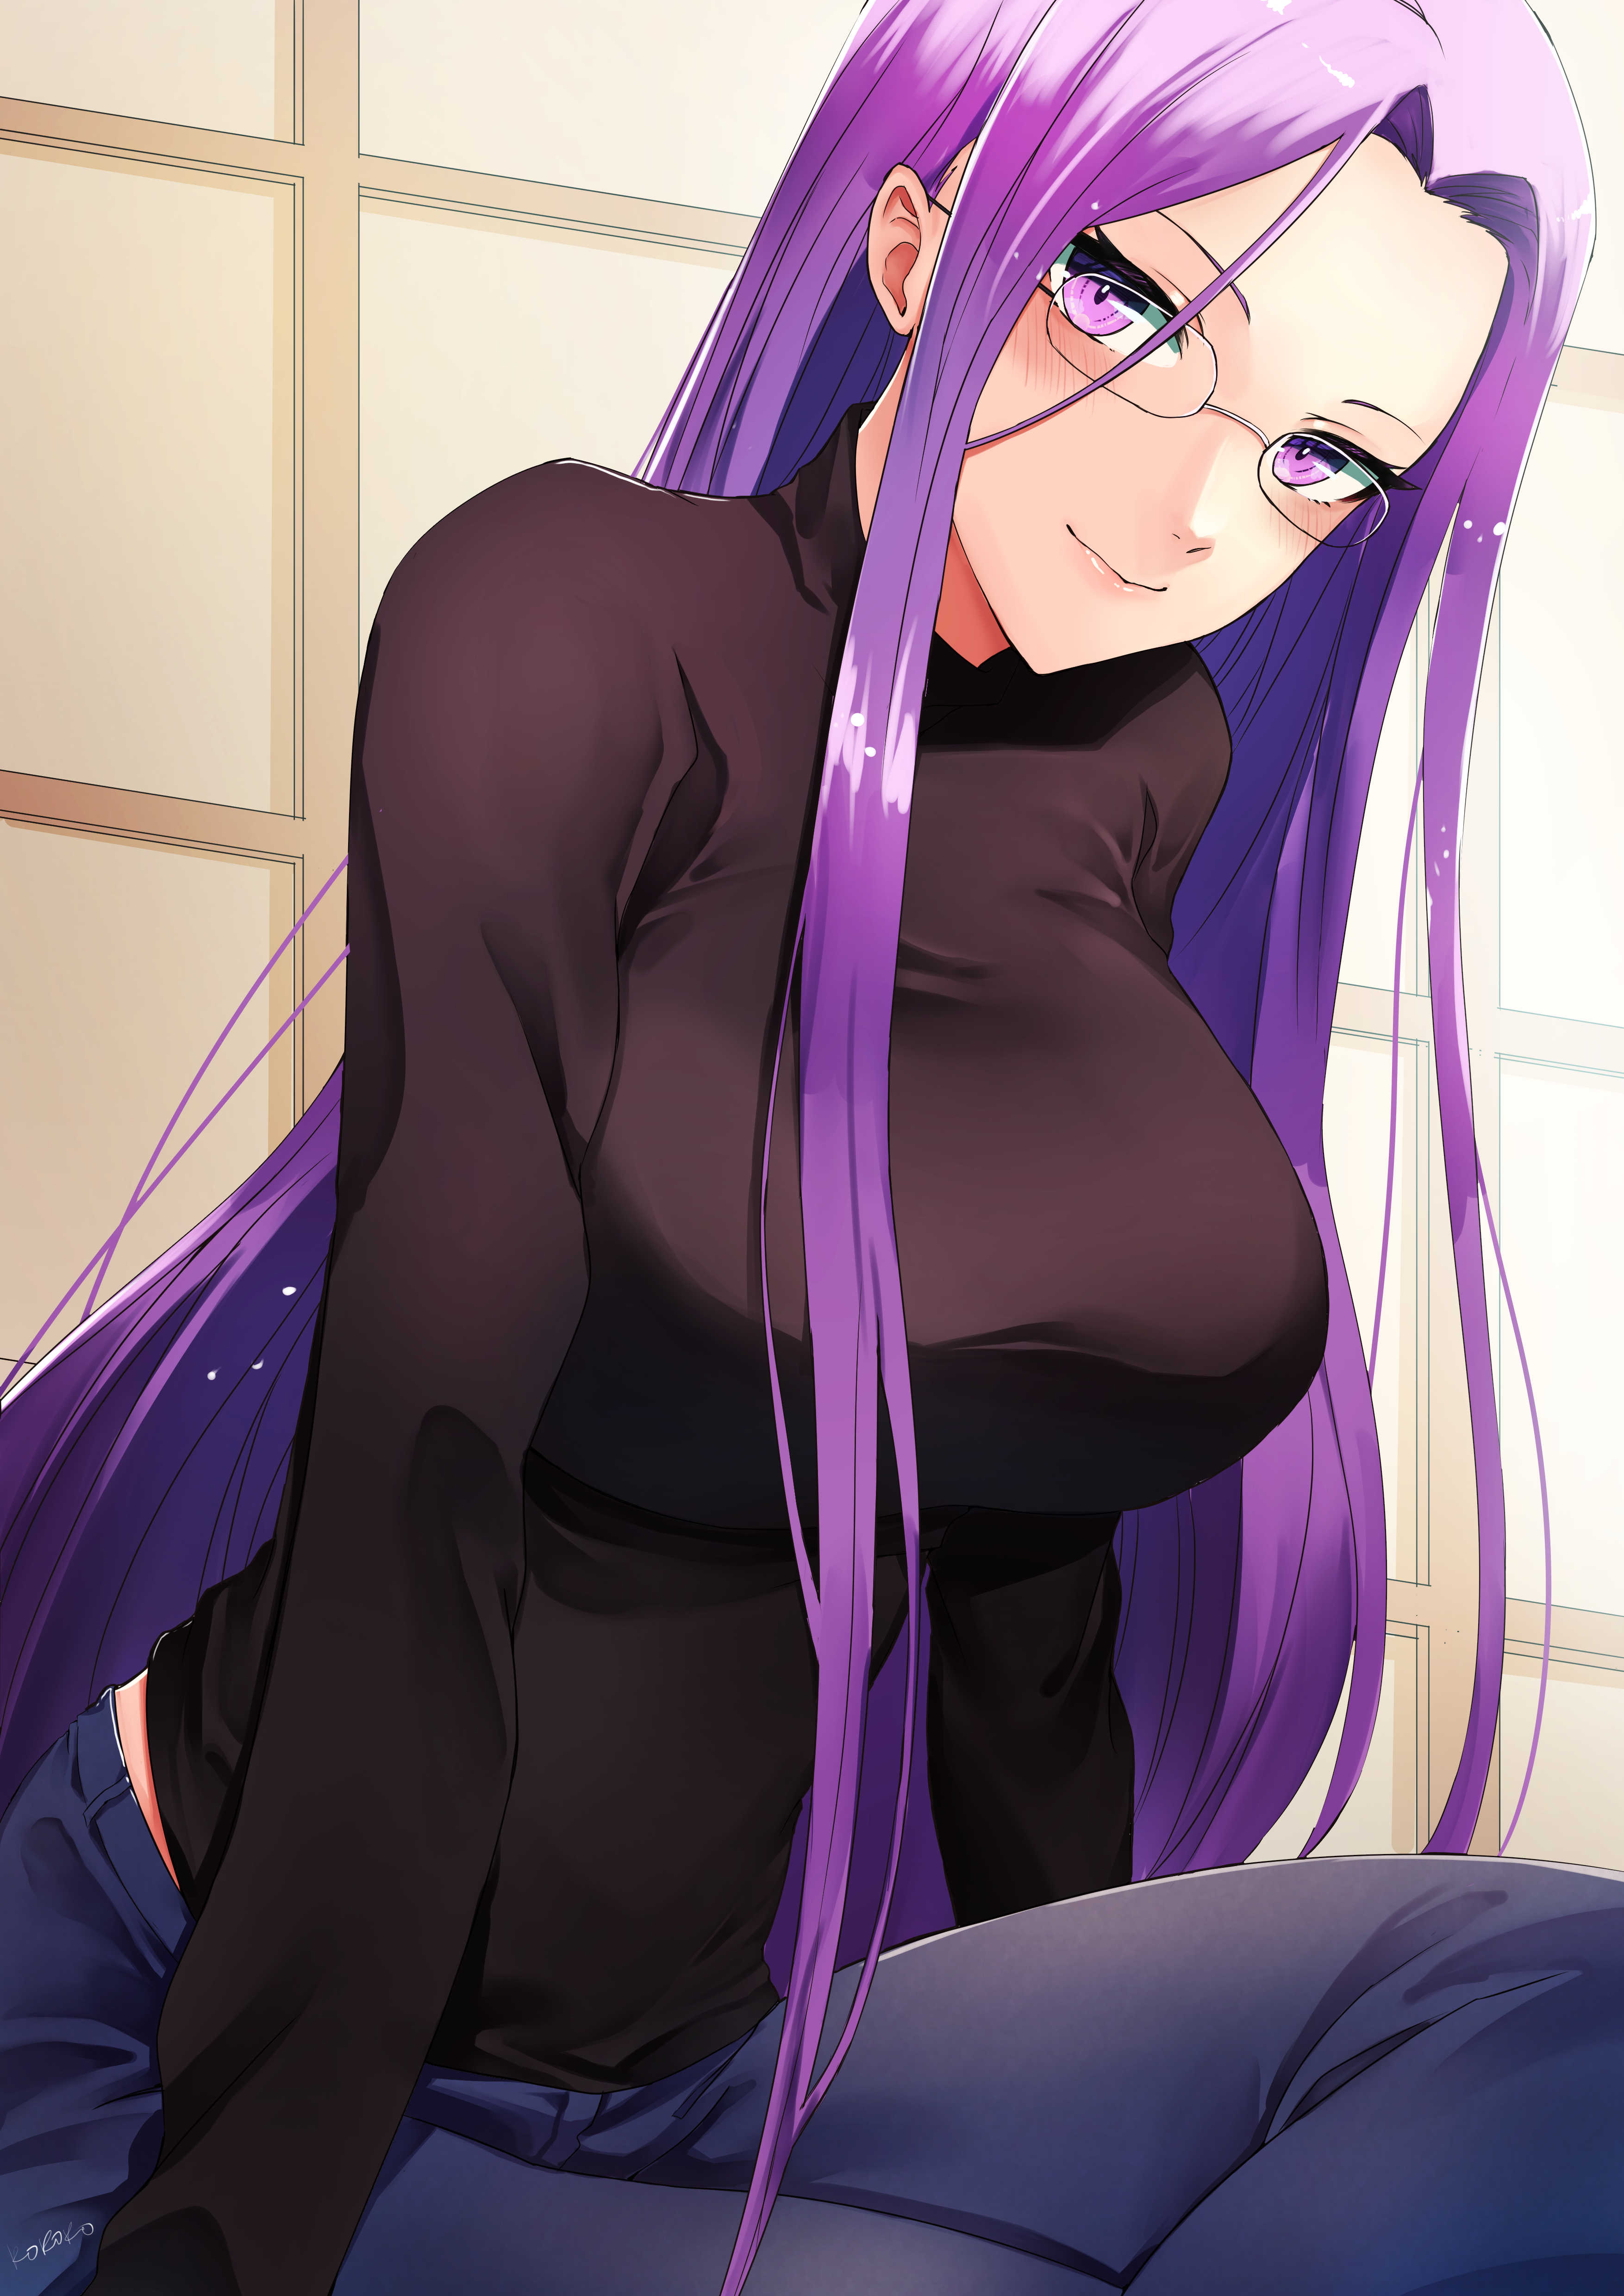 Anime 3508x4961 fate/stay night: heaven's feel Fate/Stay Night Fate series purple hair jeans black sweater thighs big boobs blushing looking at viewer meganekko long hair Rider (Fate/Stay Night) sitting arm support purple eyes anime 2D fan art women with glasses portrait display long sleeves smiling artwork Fate/Hollow Ataraxia Memero women indoors anime girls curvy